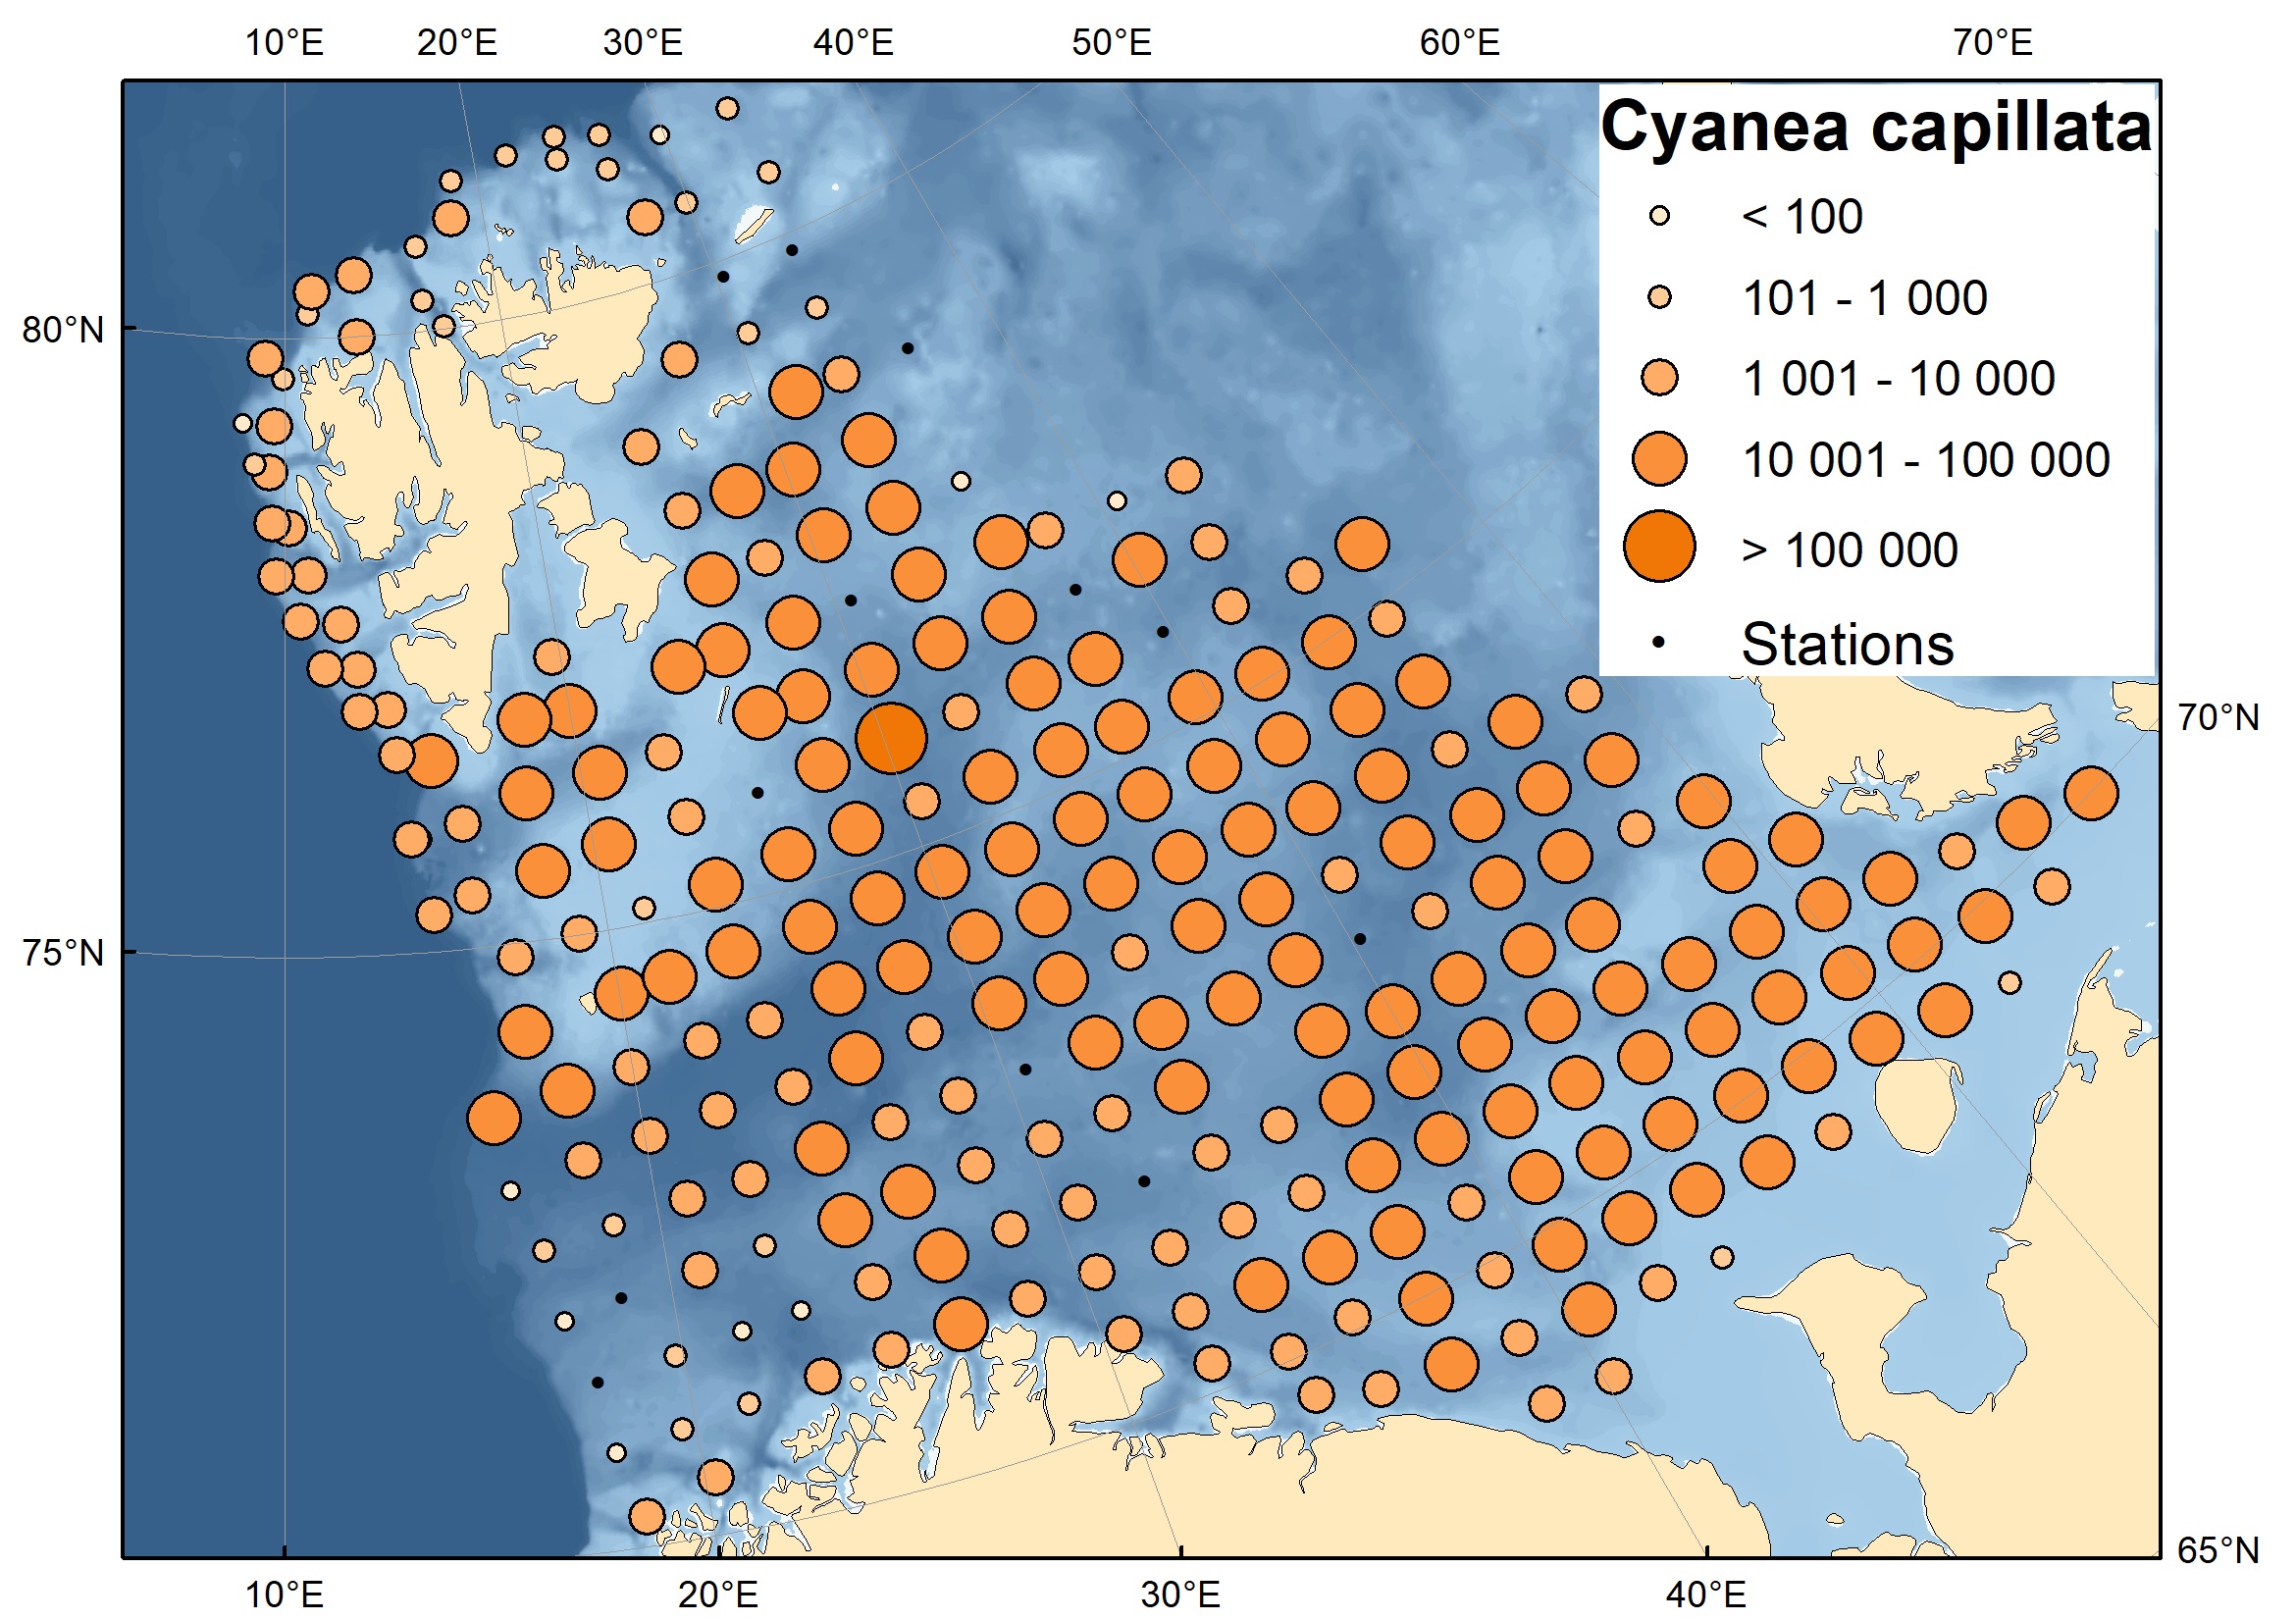 Figure 5.3.3.1. Distribution of Cyanea capillata (wet weight; kg per nmi) in the Barents Sea, August-October 2023. 